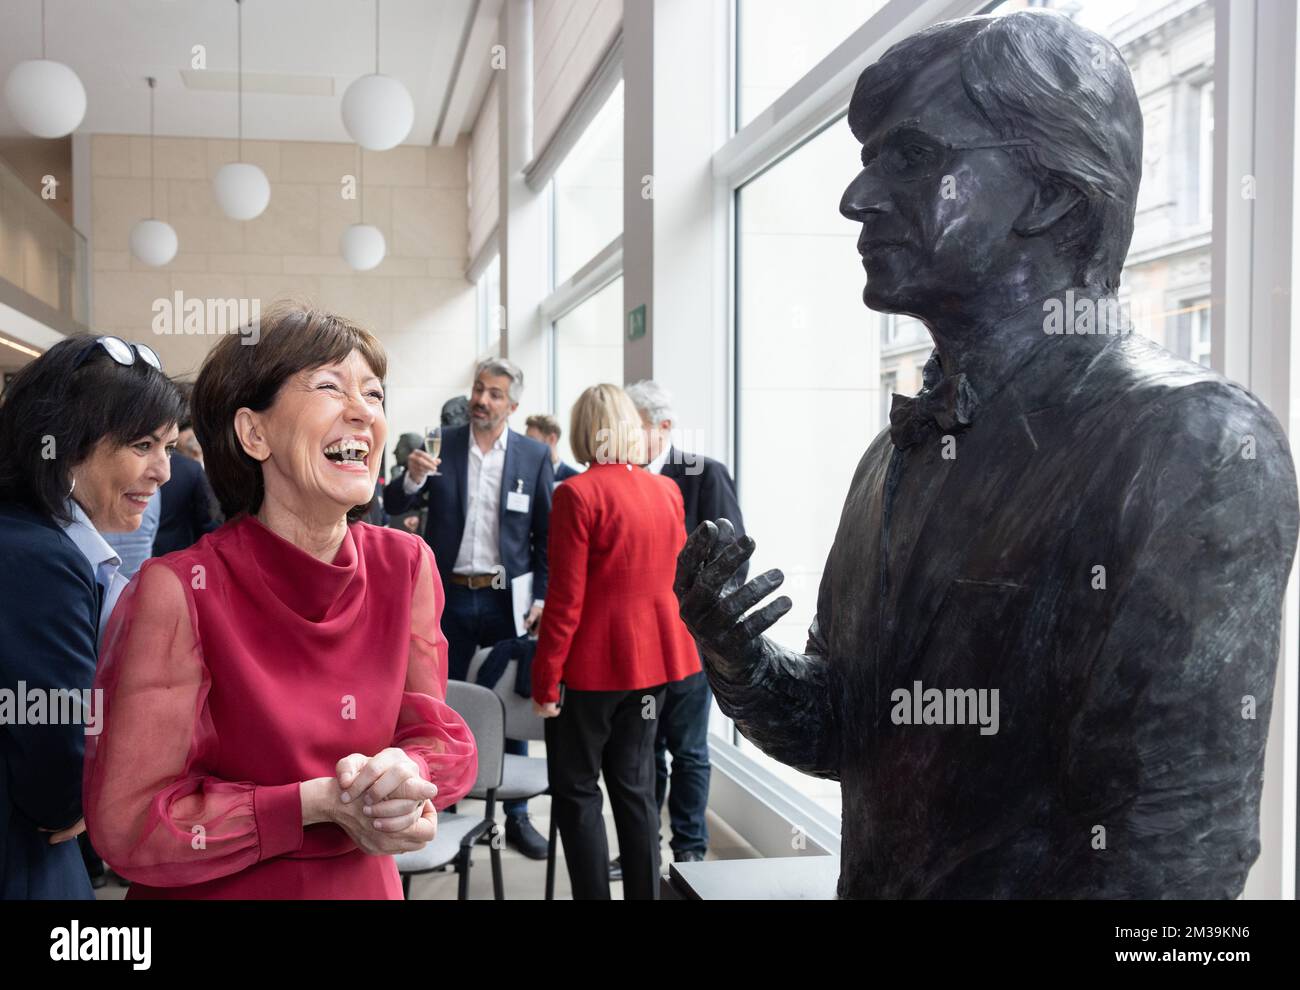 Joelle Milquet and PS' Laurette Onkelinx pictured during the inauguration of a sculpture of Walloon Minister President Elio Di Rupo, Friday 22 April 2022 at the Chamber at the Federal Parliament in Brussels. BELGA PHOTO BENOIT DOPPAGNE Stock Photo